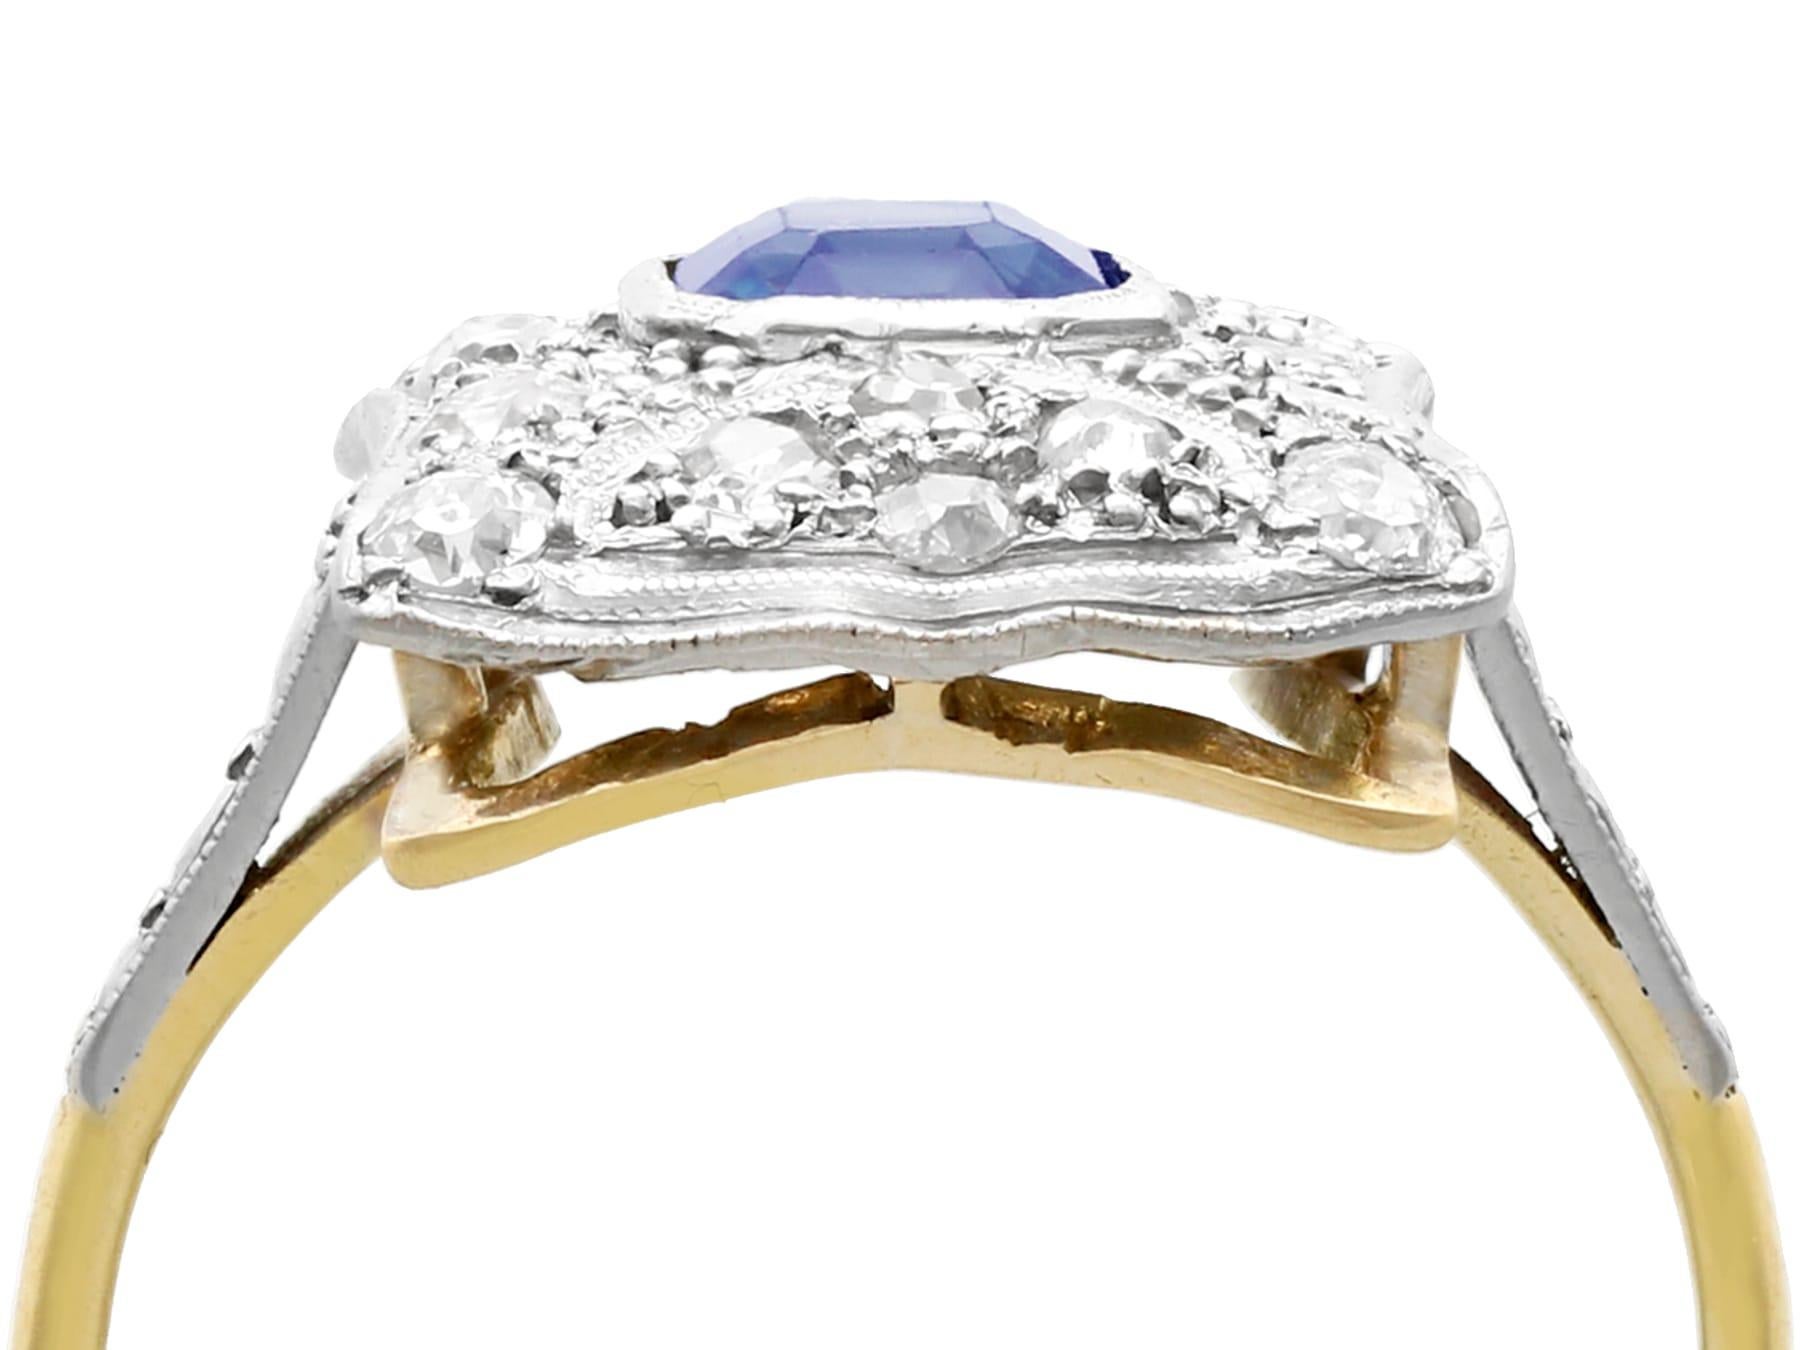 A fine and impressive 1.20 carat natural blue sapphire and 0.68 carat diamond, 18k yellow gold and platinum set dress ring in the Art Deco style; part of our antique jewelry and estate jewelry collections.

This fine and impressive antique 1920s